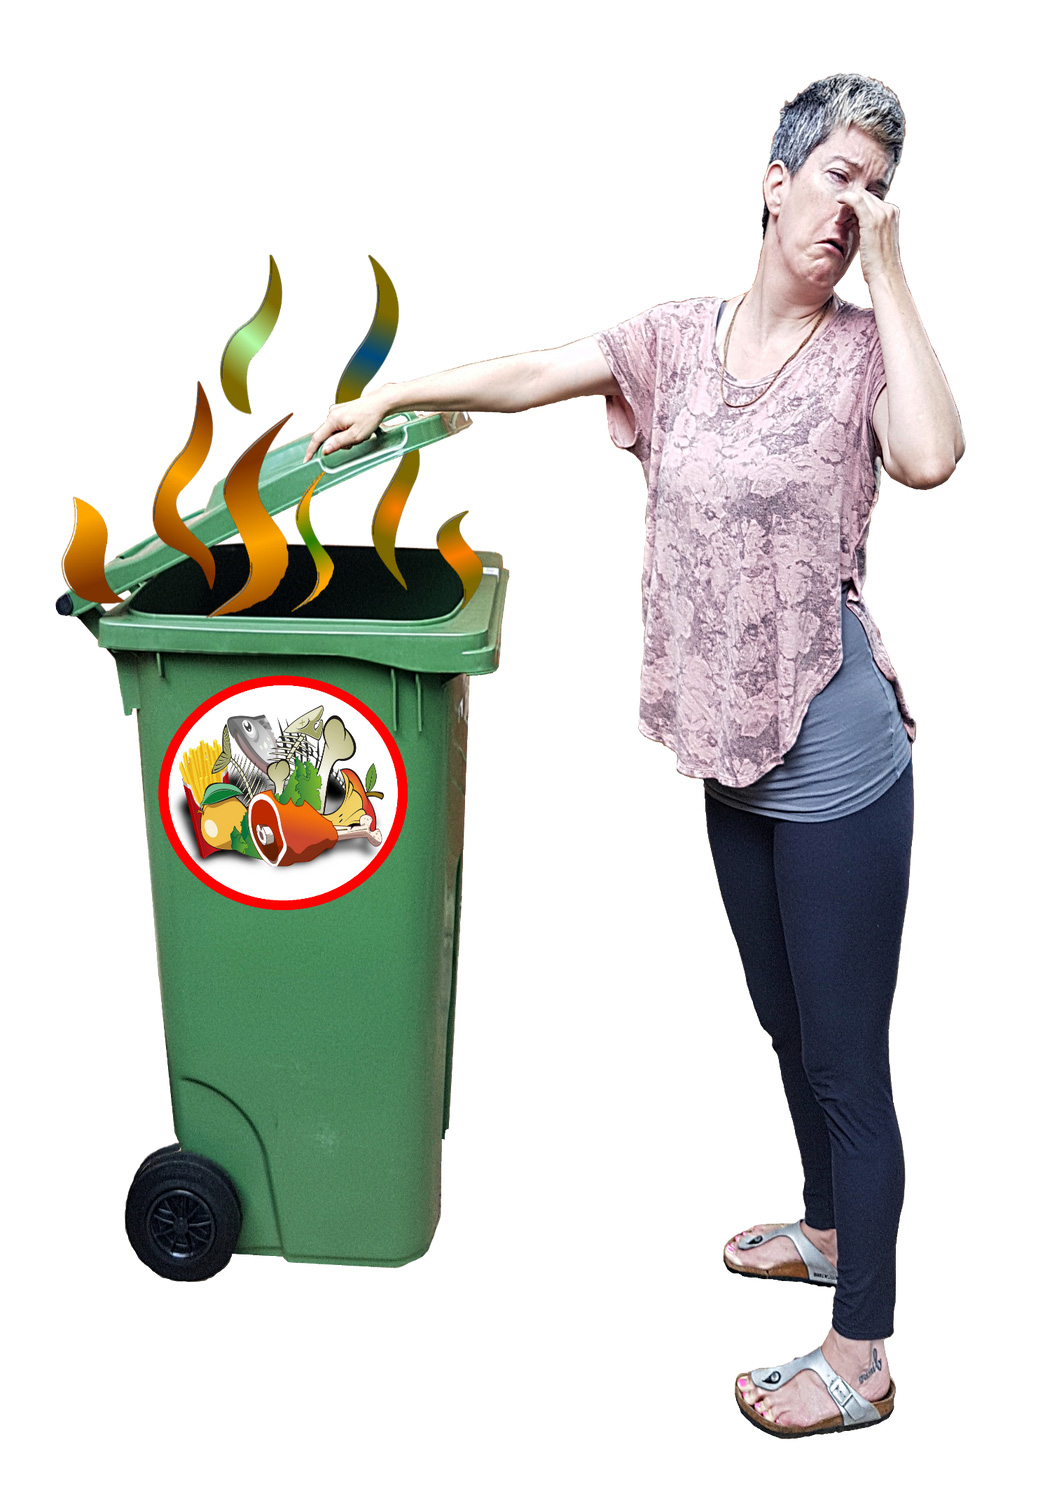 Green bin smells bad after cleaning